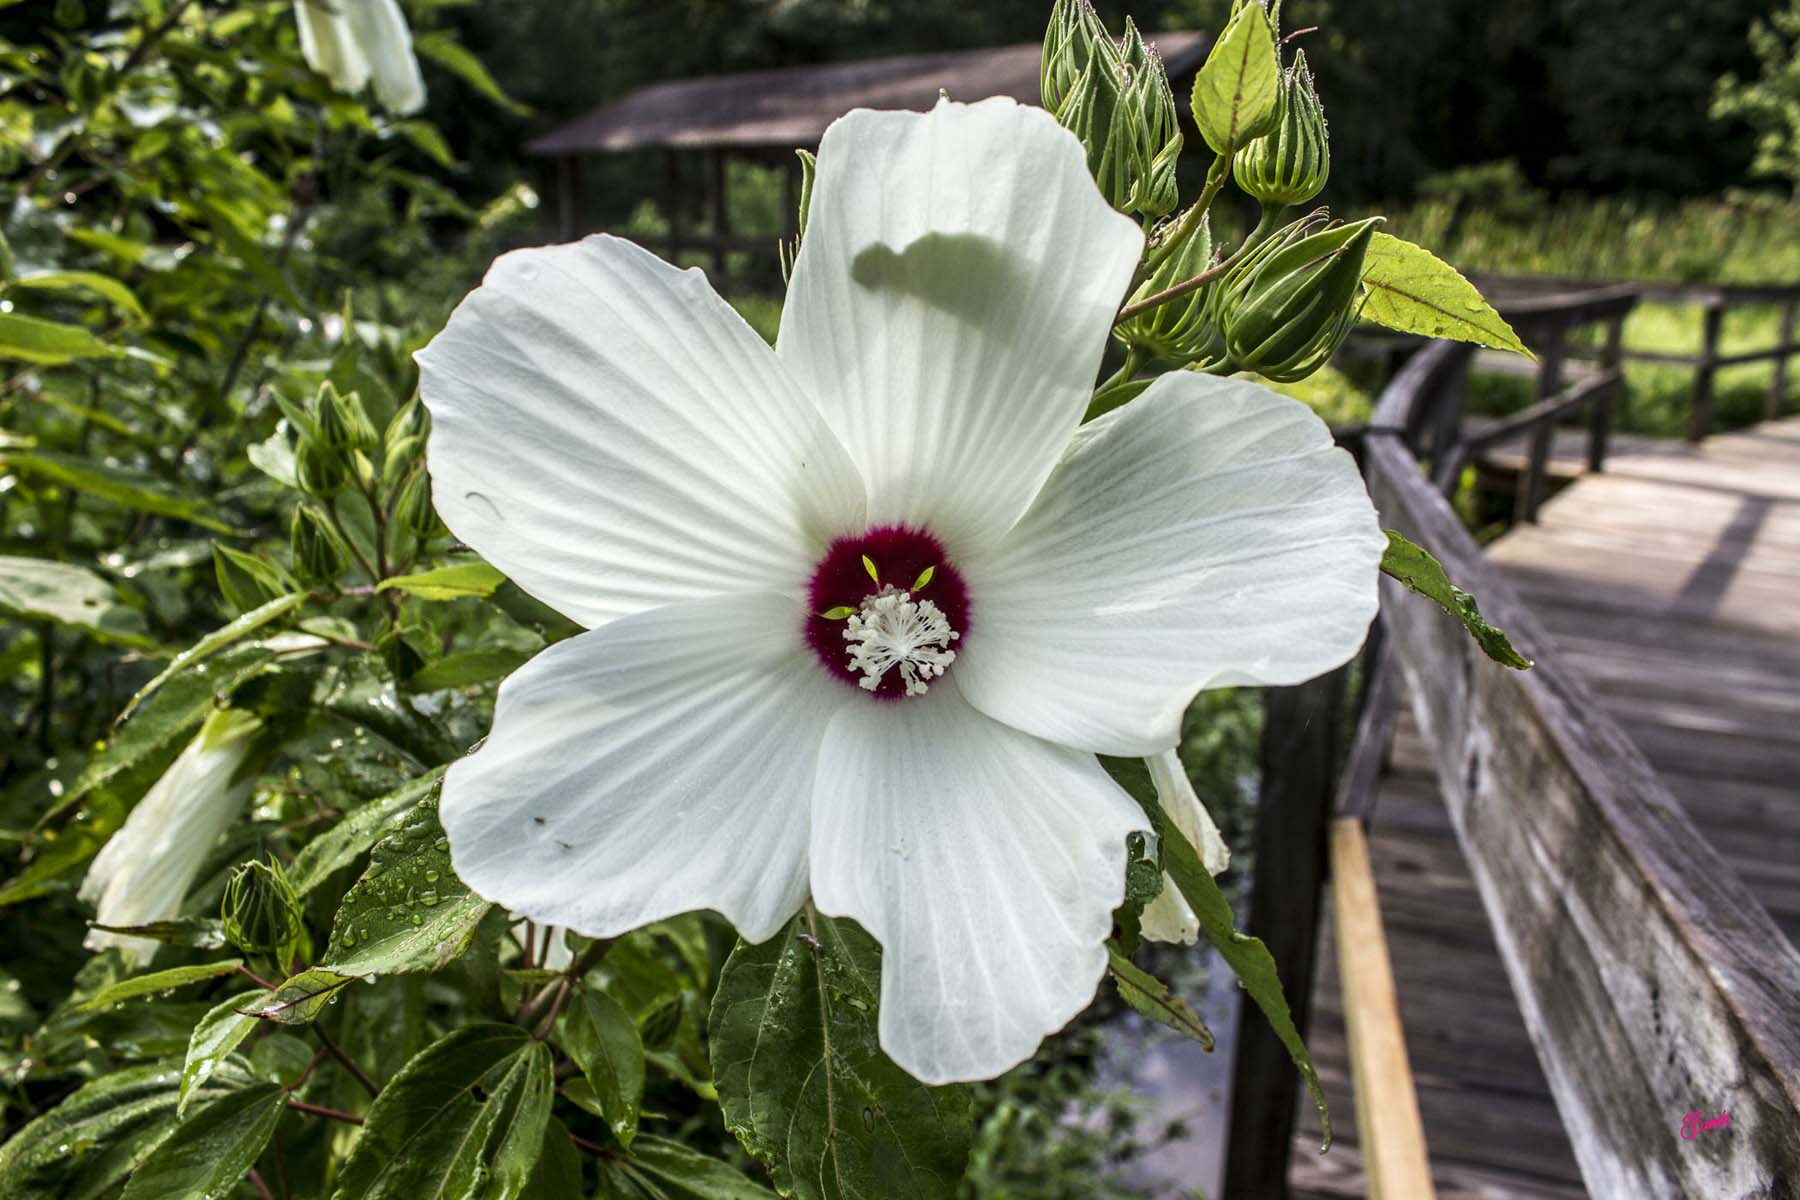 This photo is of a swamp rose mallow bloom. The flower is white with five large petals. The center where they meet is deep red with white reproductive structures. The bloom is backed by green leaves and the rails of a boardwalk.